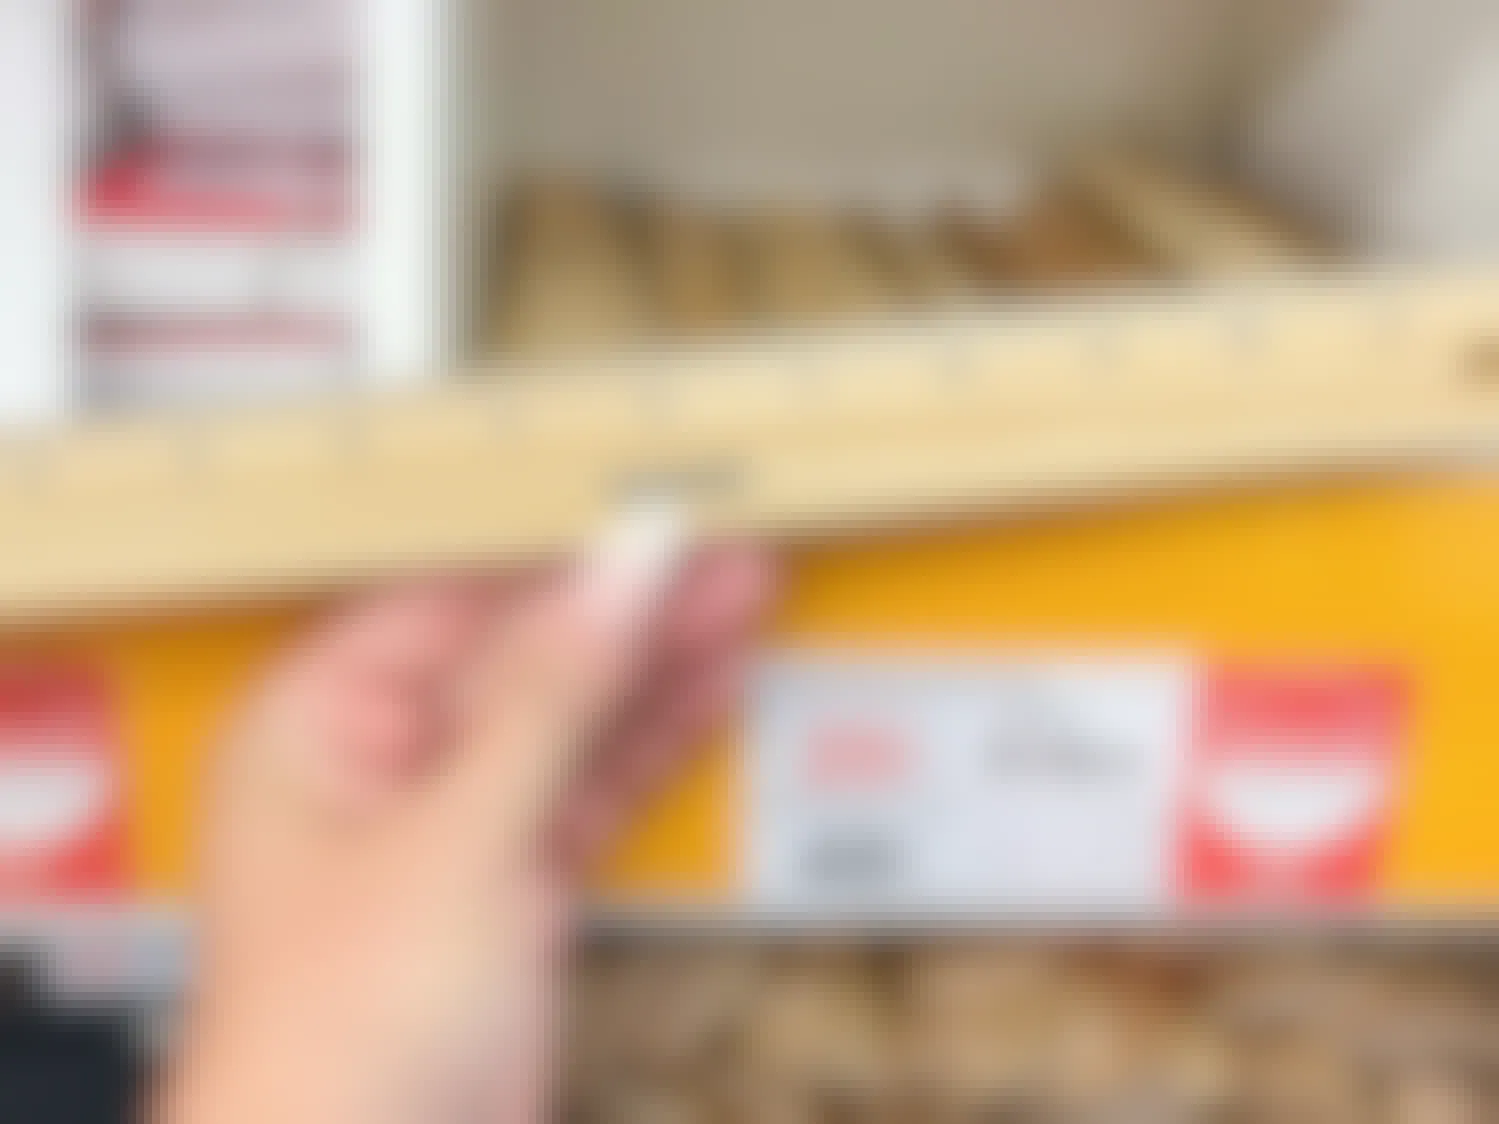 A person's hand holding a Staples ruler in front of a shelf with more rulers on sale for $0.25 at Staples.